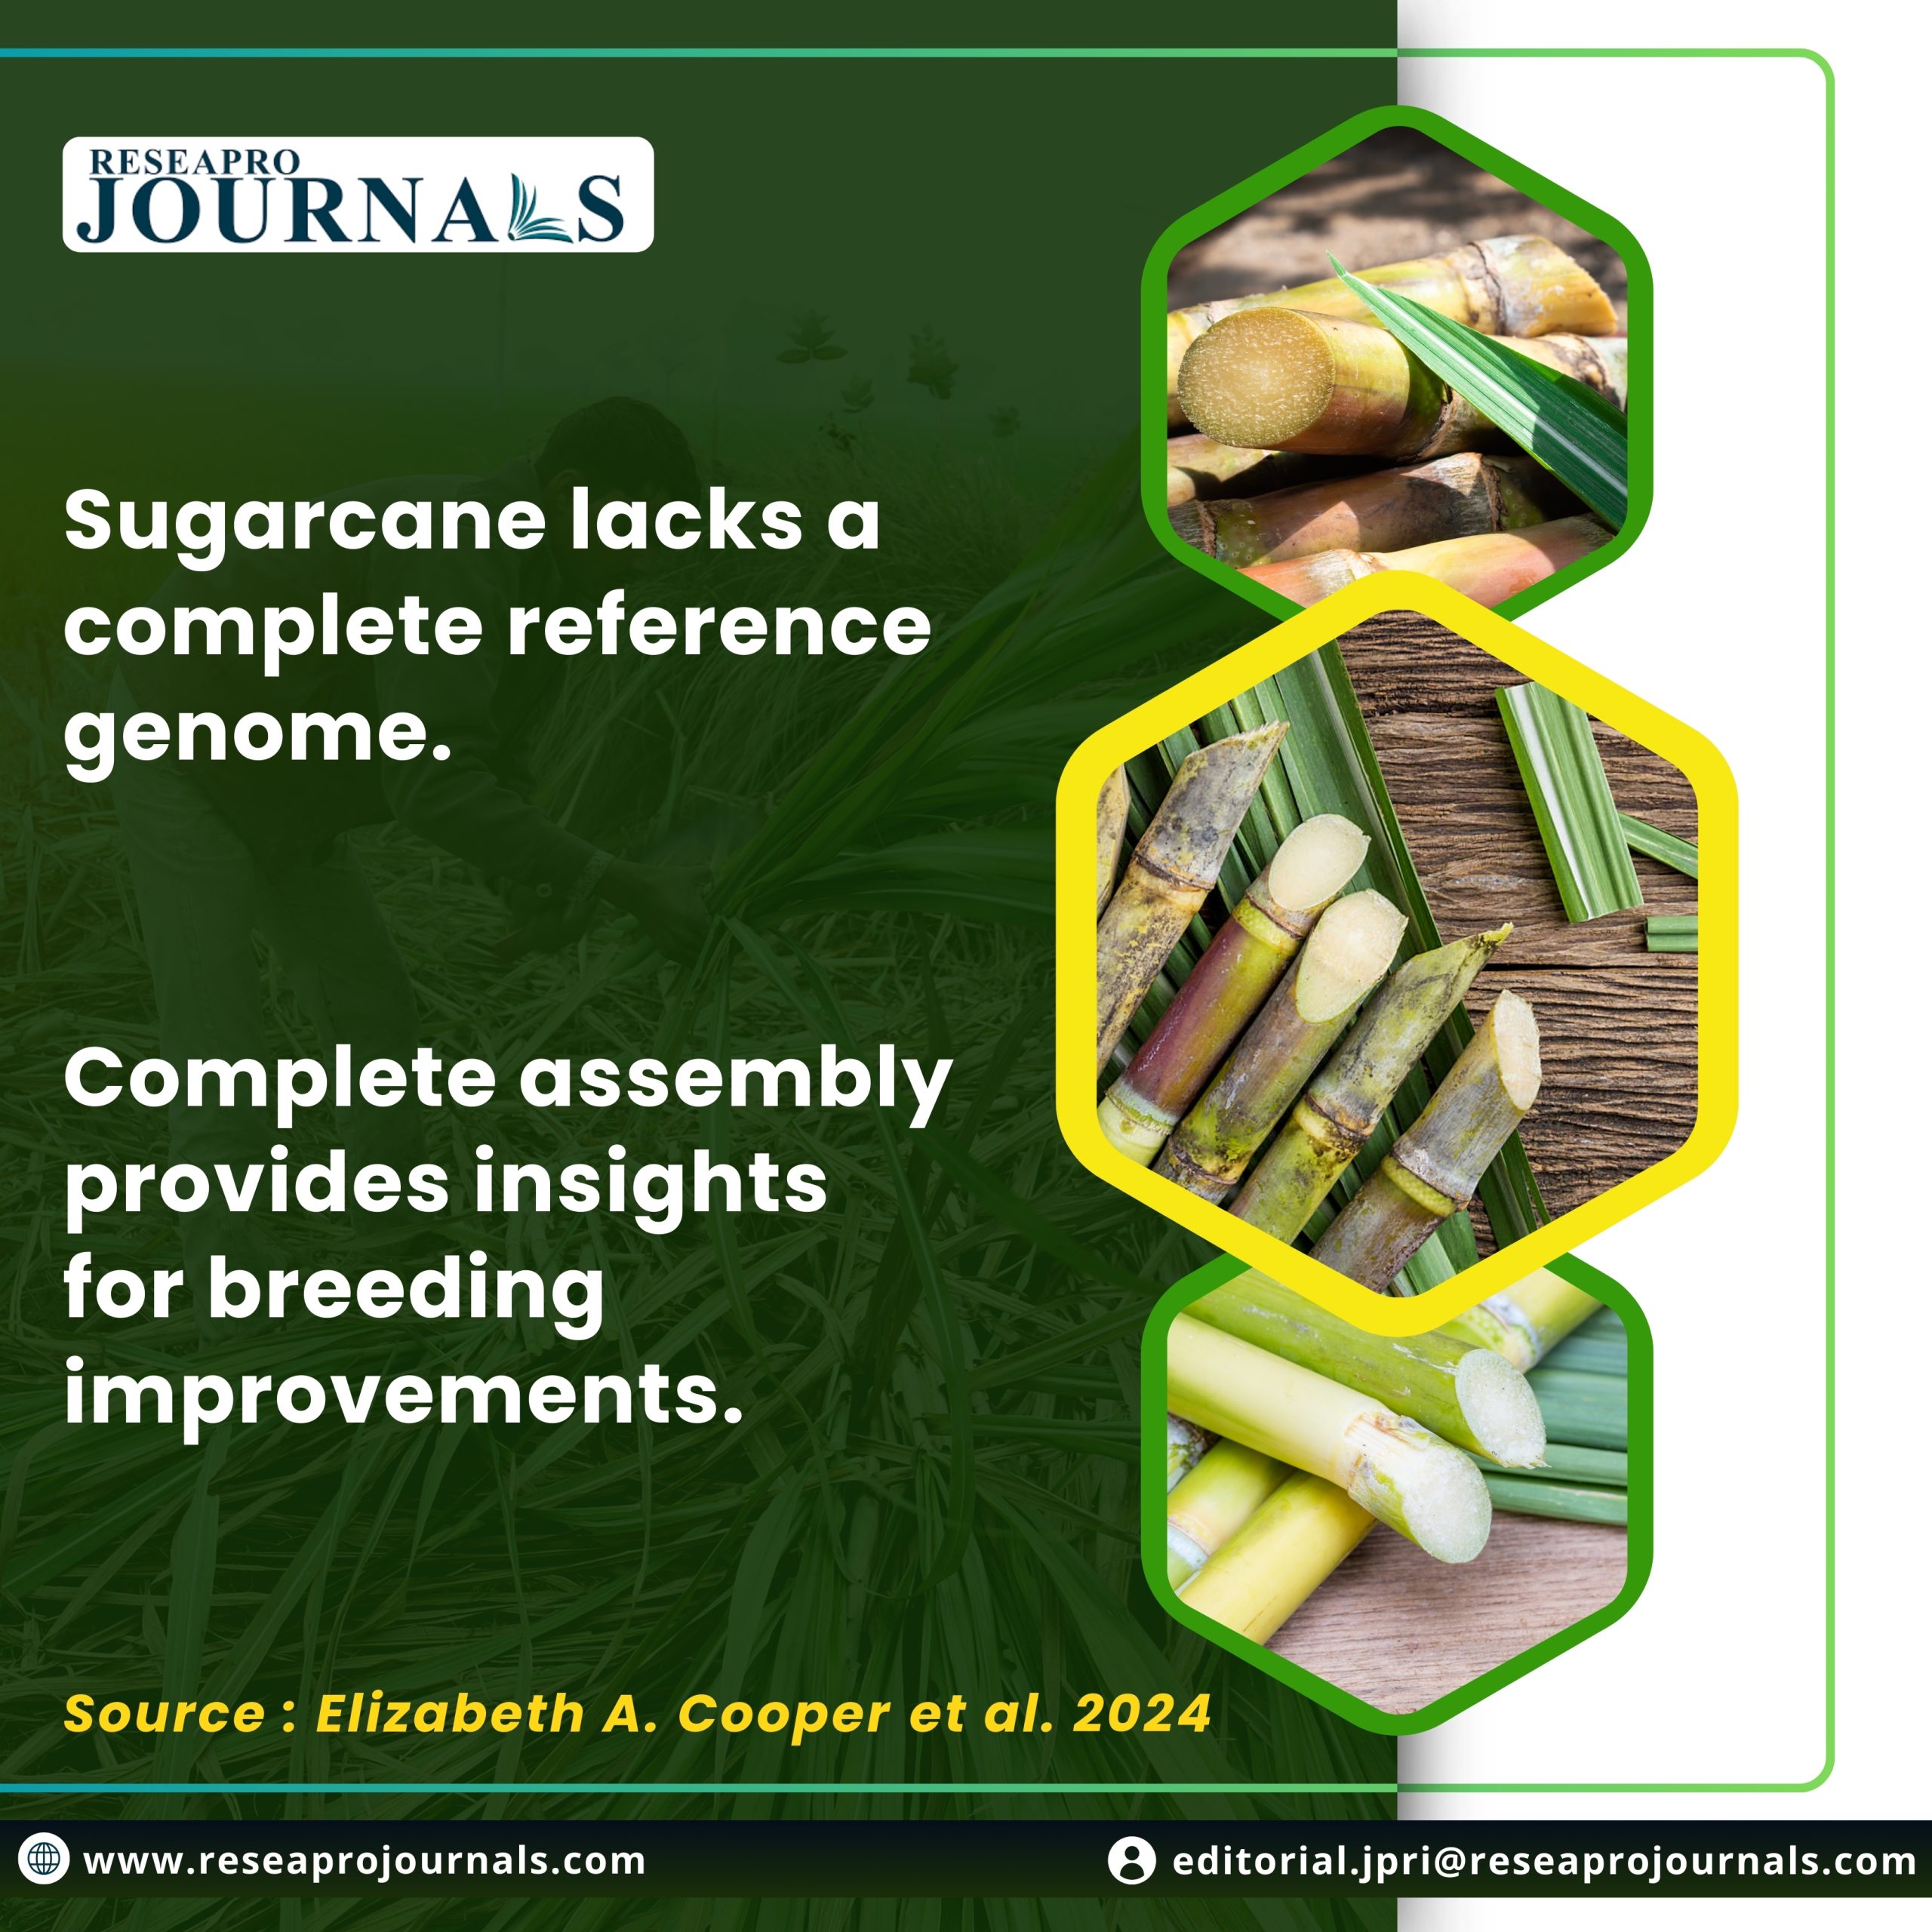 “A sweet victory for sugarcane genomics”